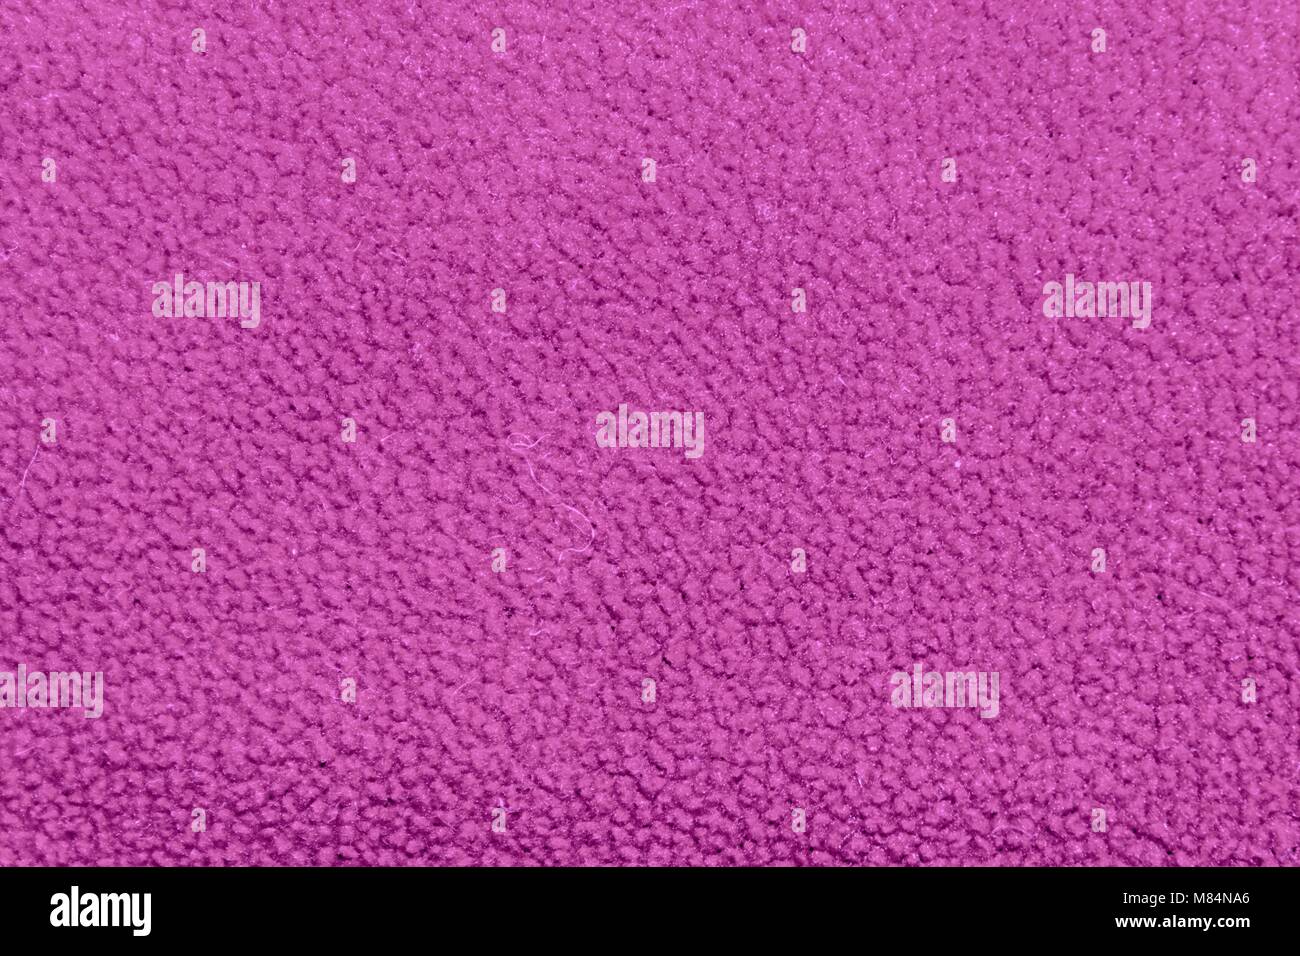 Fabric chiffon lilac colored texture or background. Stock Photo